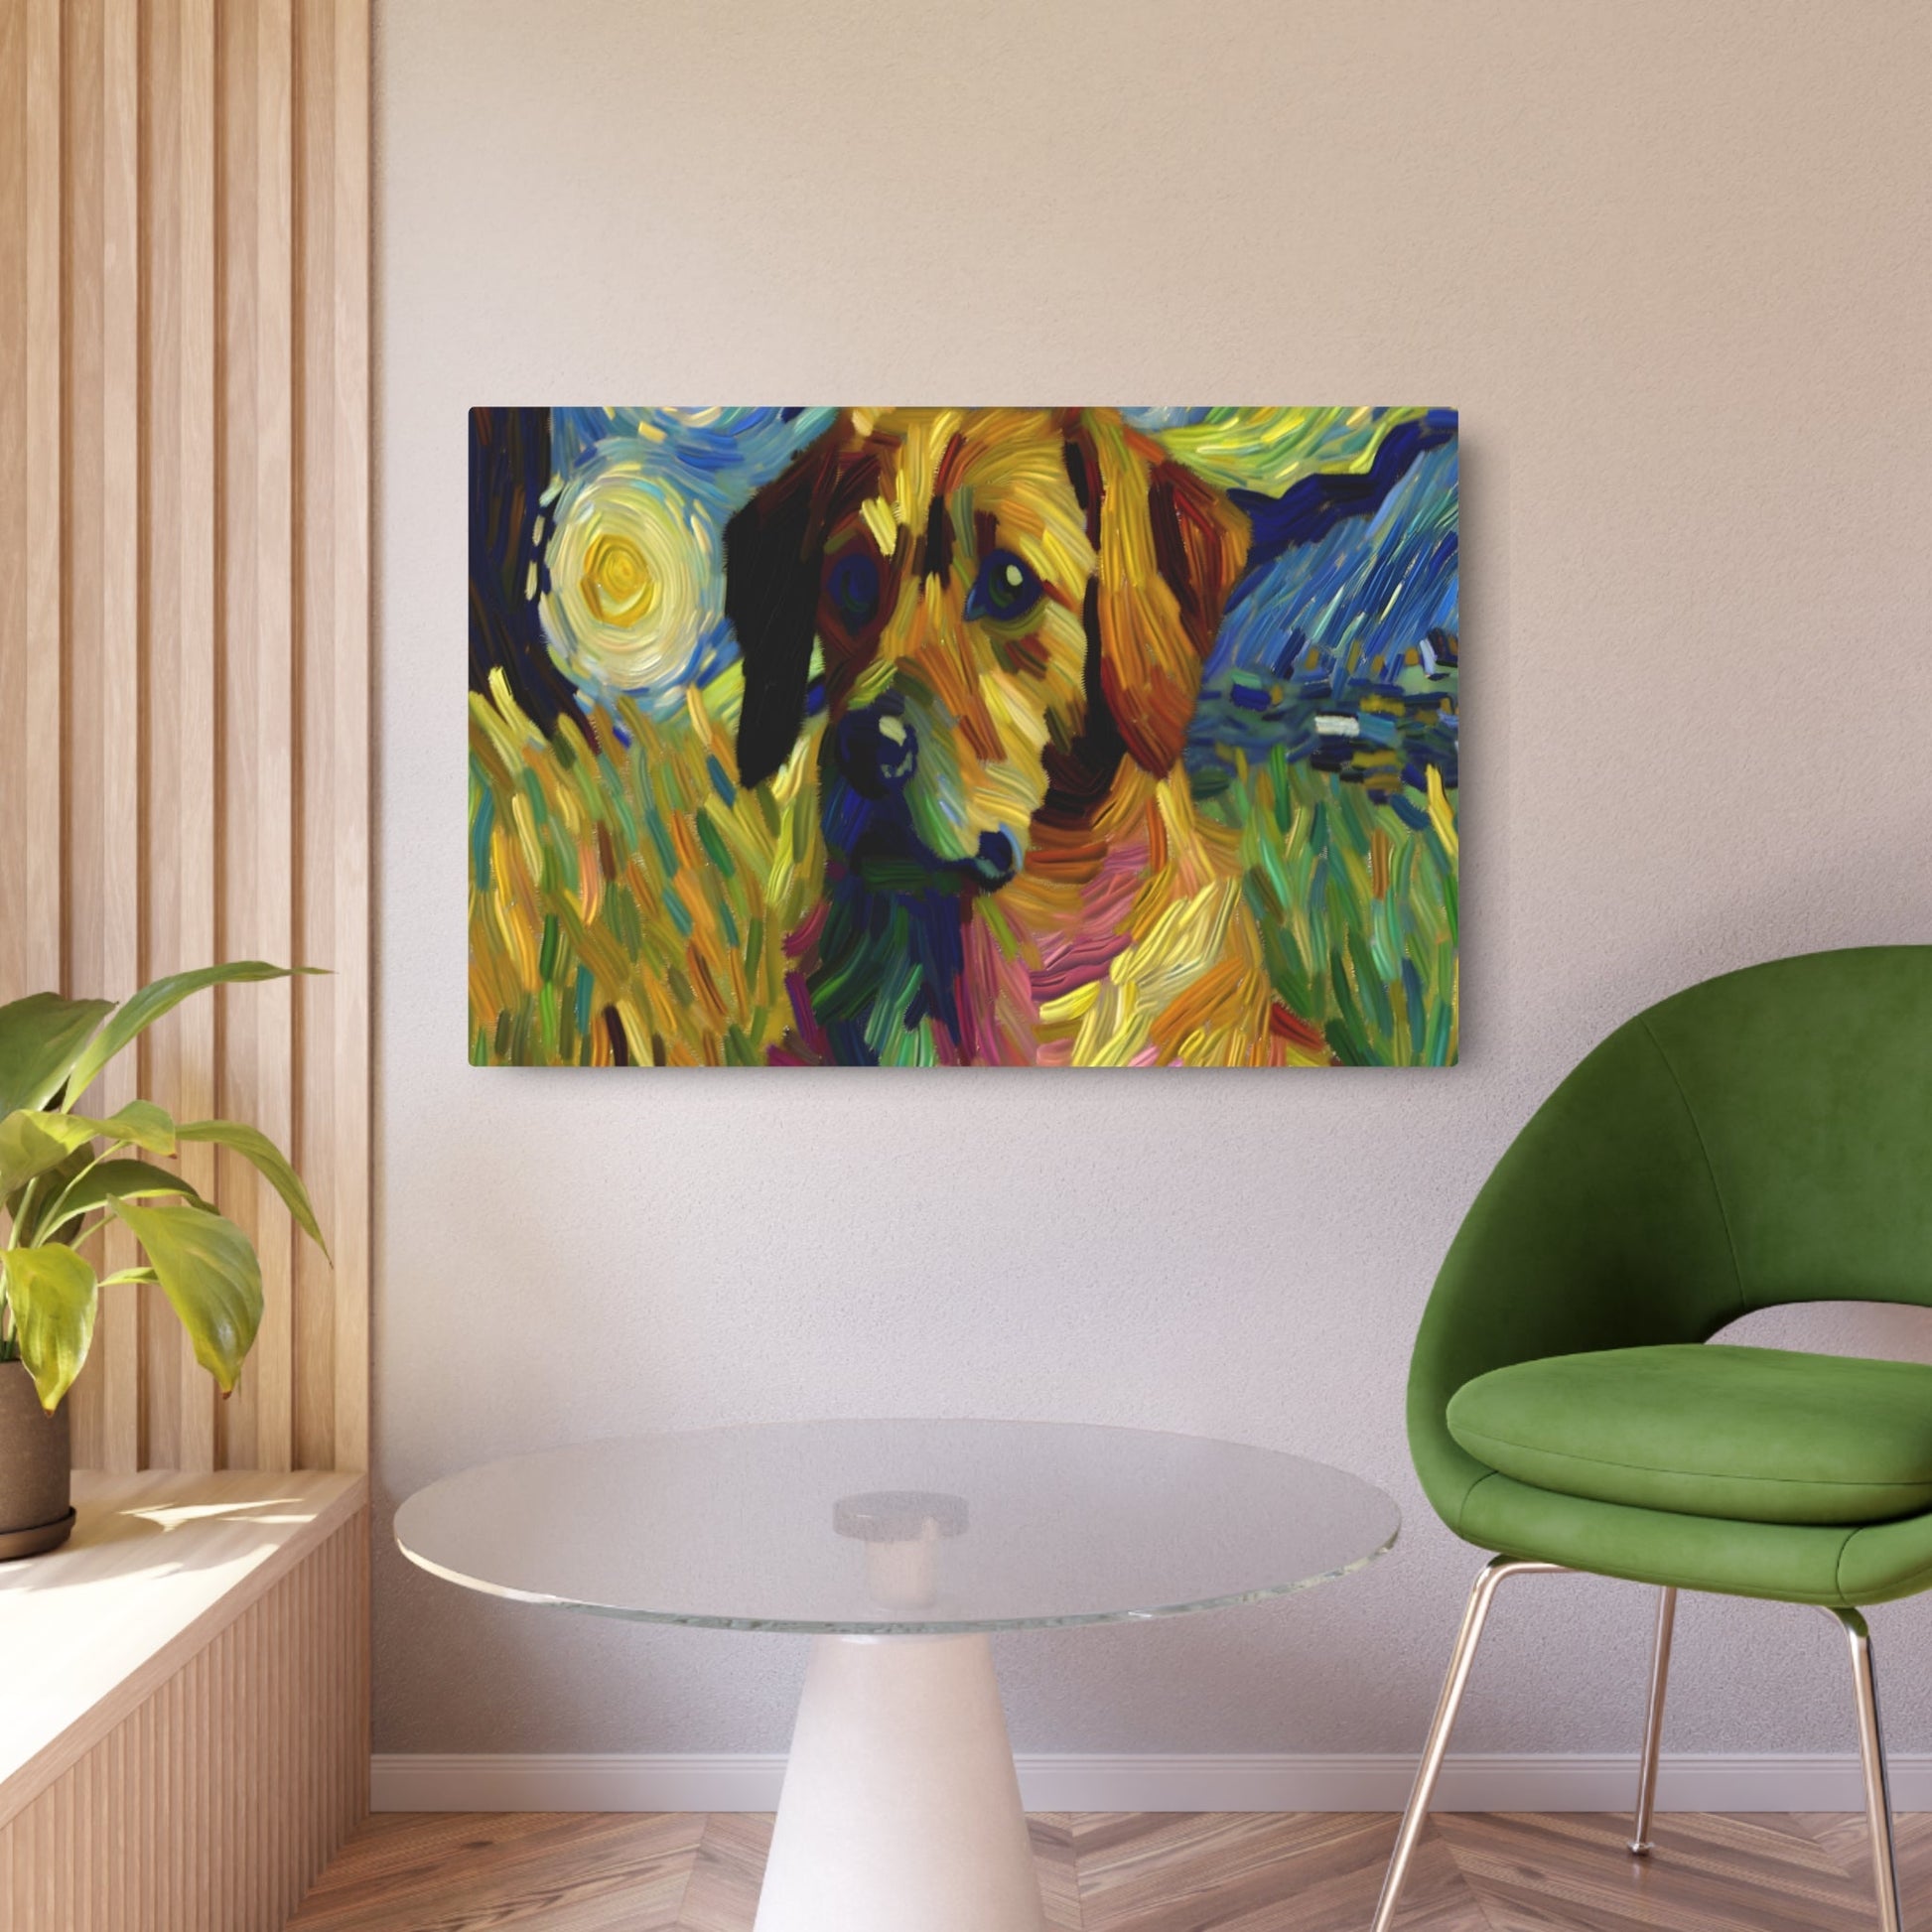 Metal Poster Art | "Post-Impressionistic Vibrant Dog Painting - Thick Textured Brushstrokes Inspired by Van Gogh's Starry Night - Western Art Styles - Metal Poster Art 36″ x 24″ (Horizontal) 0.12''